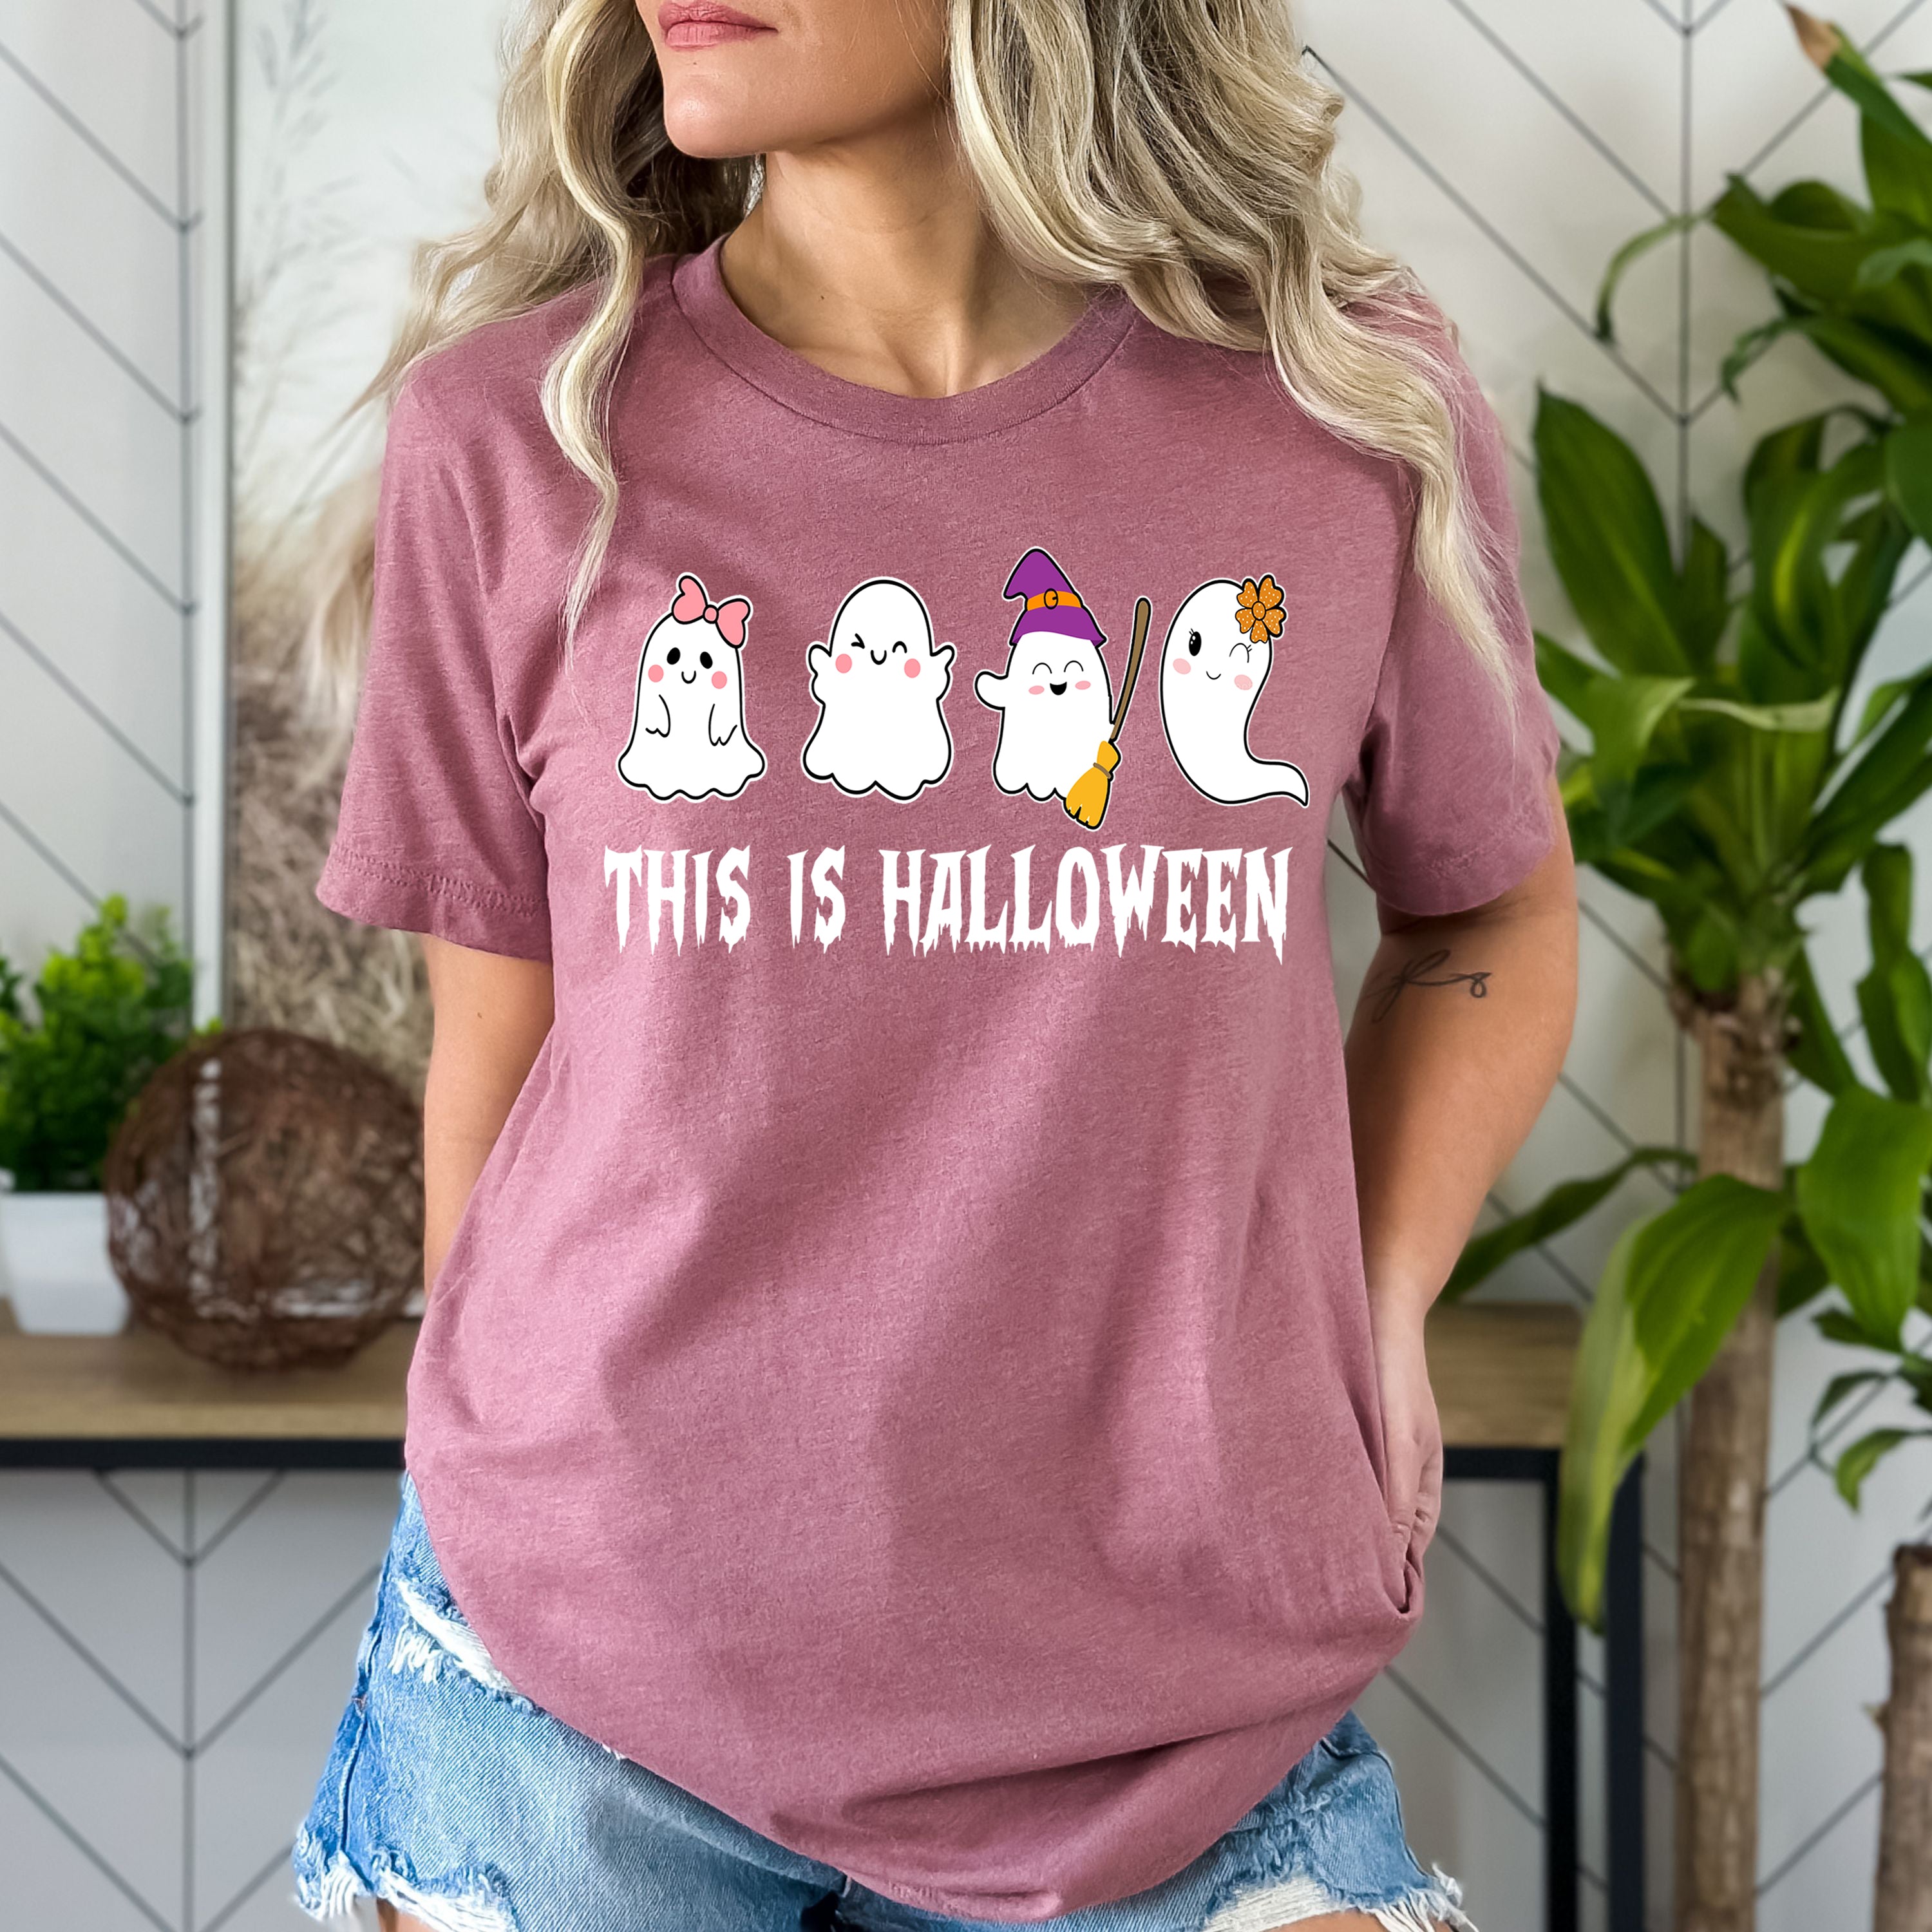 This Is Halloween - Bella Canvas